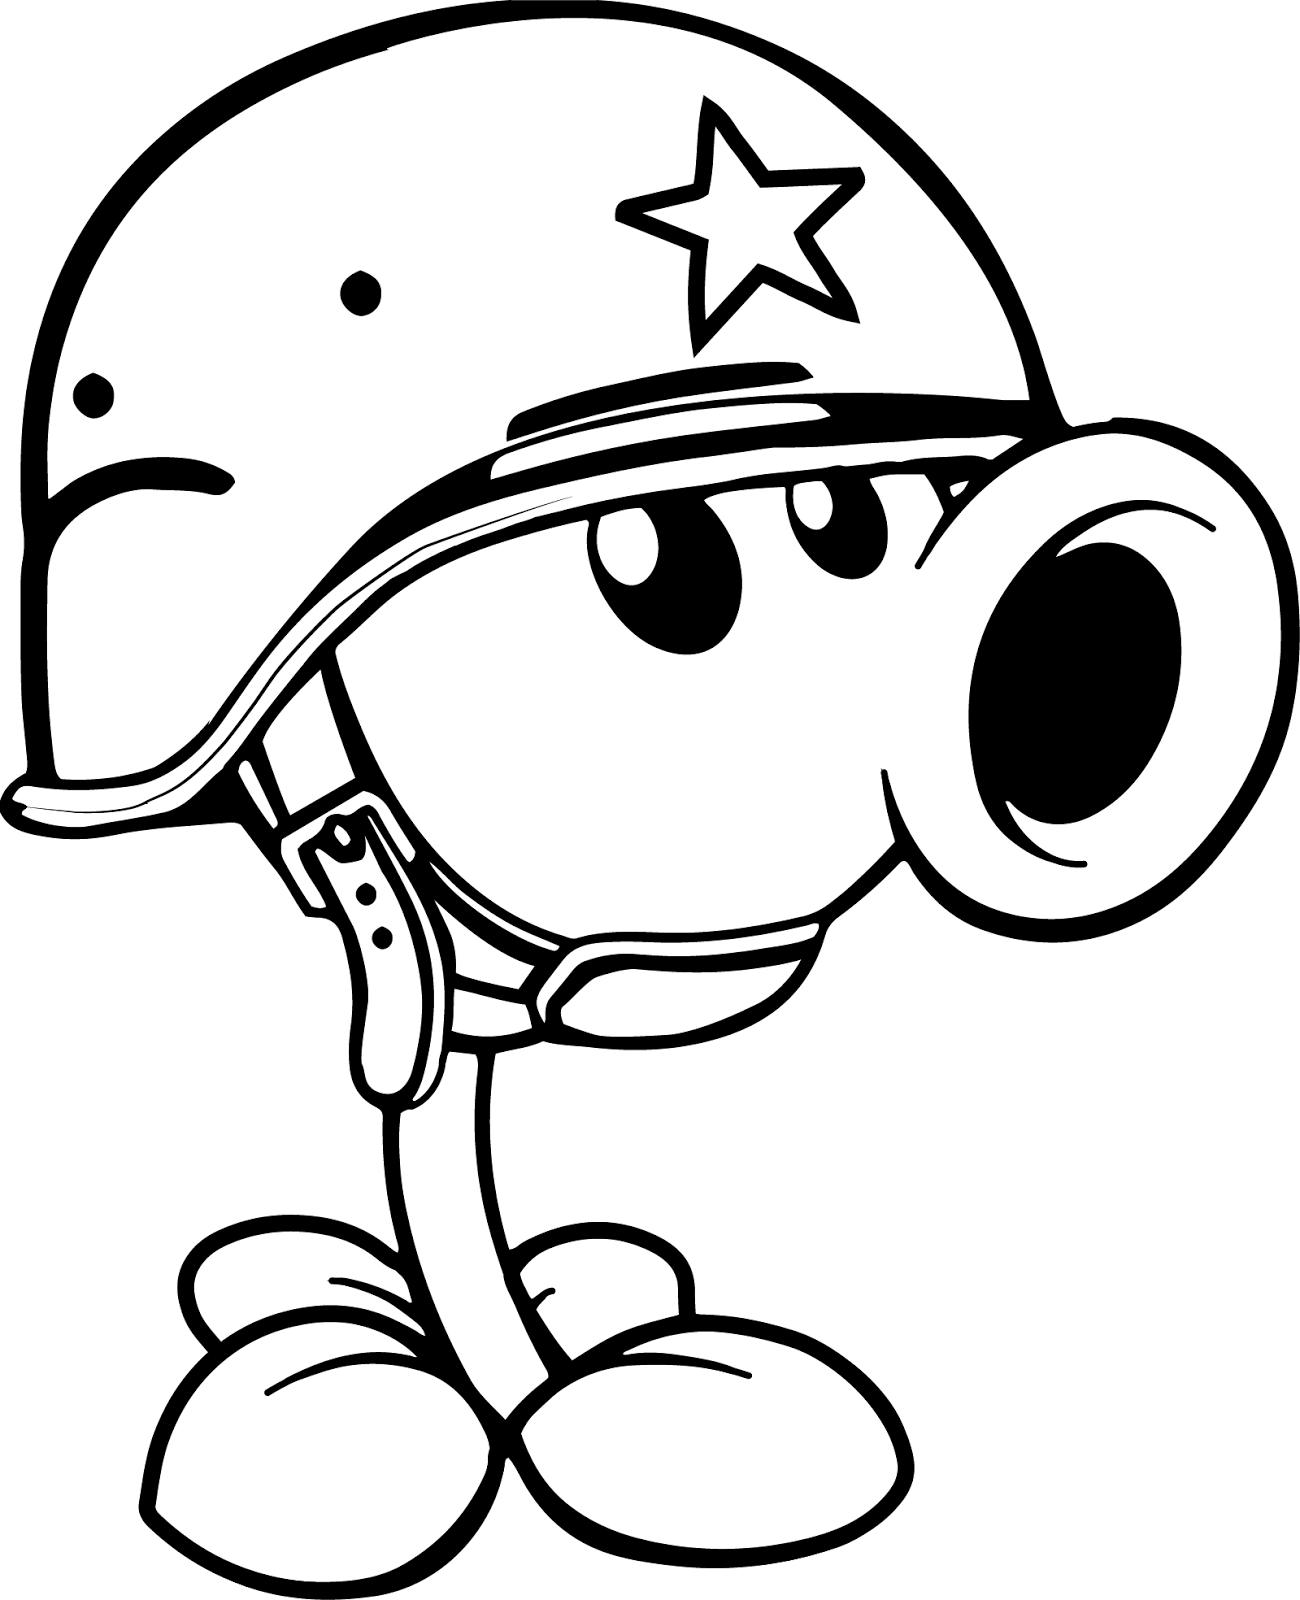 Plants Vs Zombies Coloring Pages Free Coloring Pages Plants Vs Zombies Birthday Party